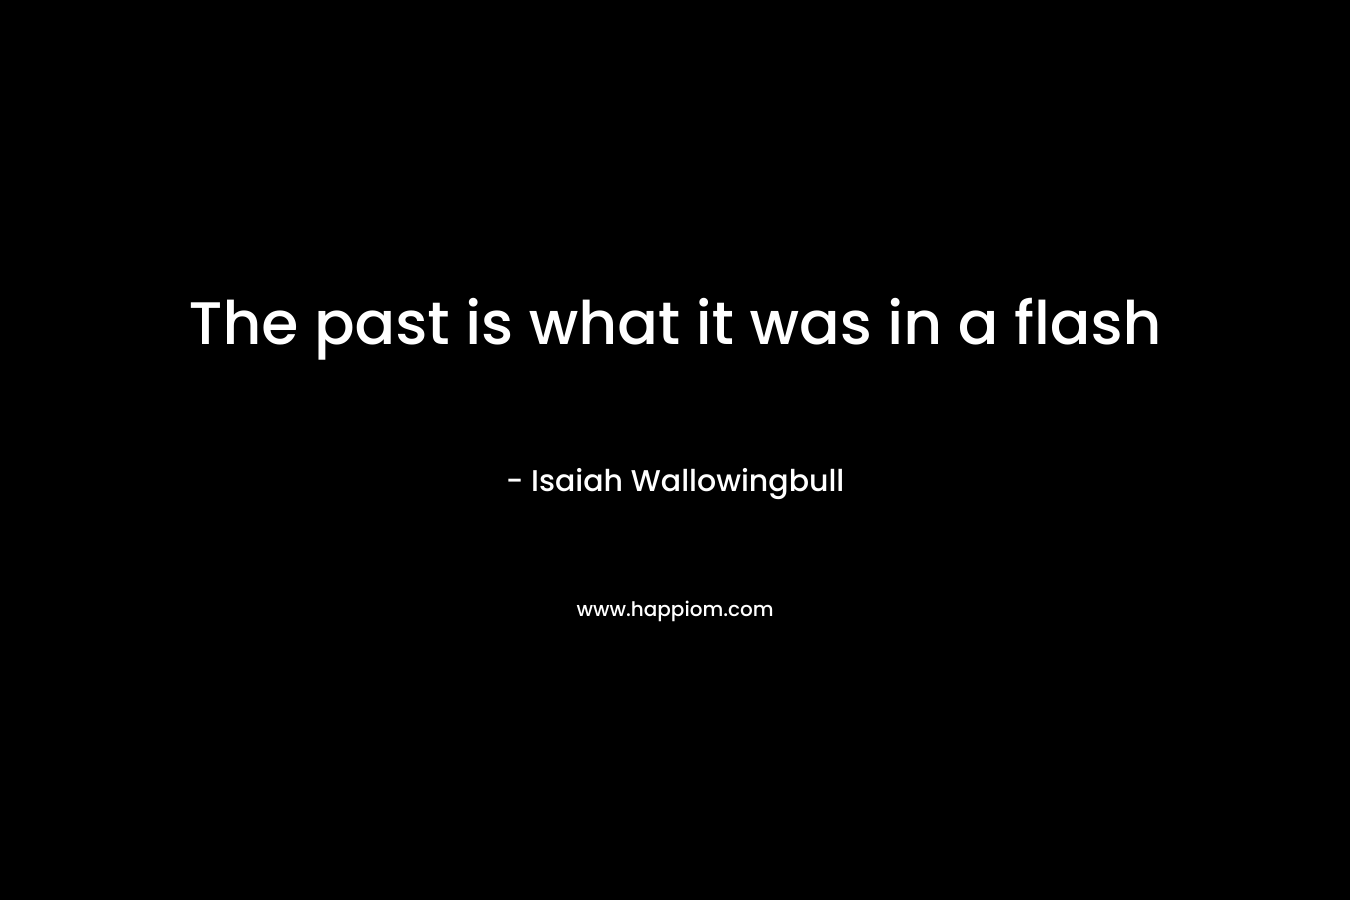 The past is what it was in a flash – Isaiah Wallowingbull